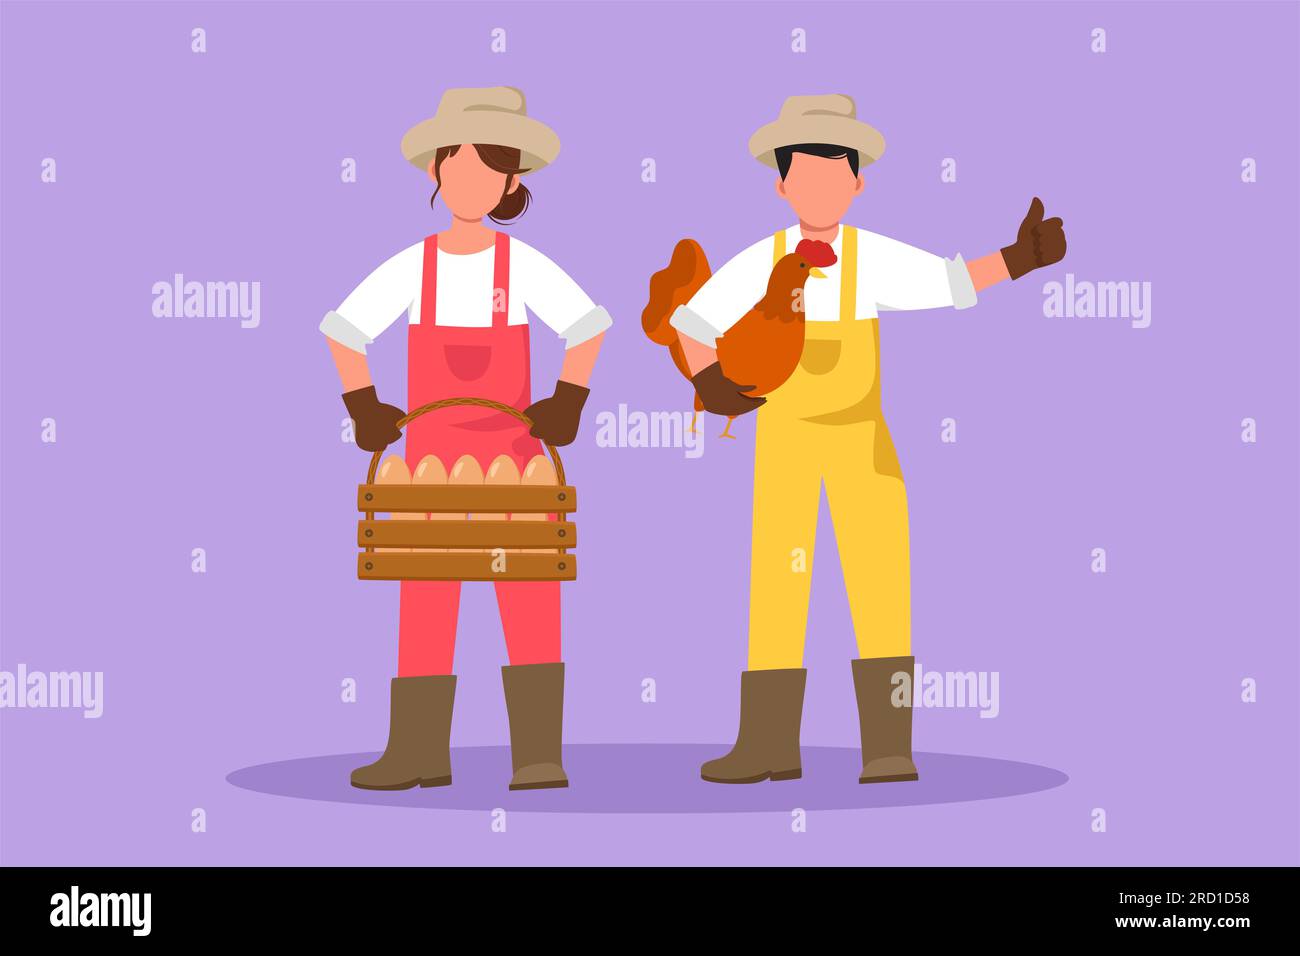 https://c8.alamy.com/comp/2RD1D58/cartoon-flat-style-drawing-of-couple-farmers-standing-with-basket-of-hens-eggs-and-chicken-on-poultry-farm-at-summertime-successful-agriculture-and-f-2RD1D58.jpg